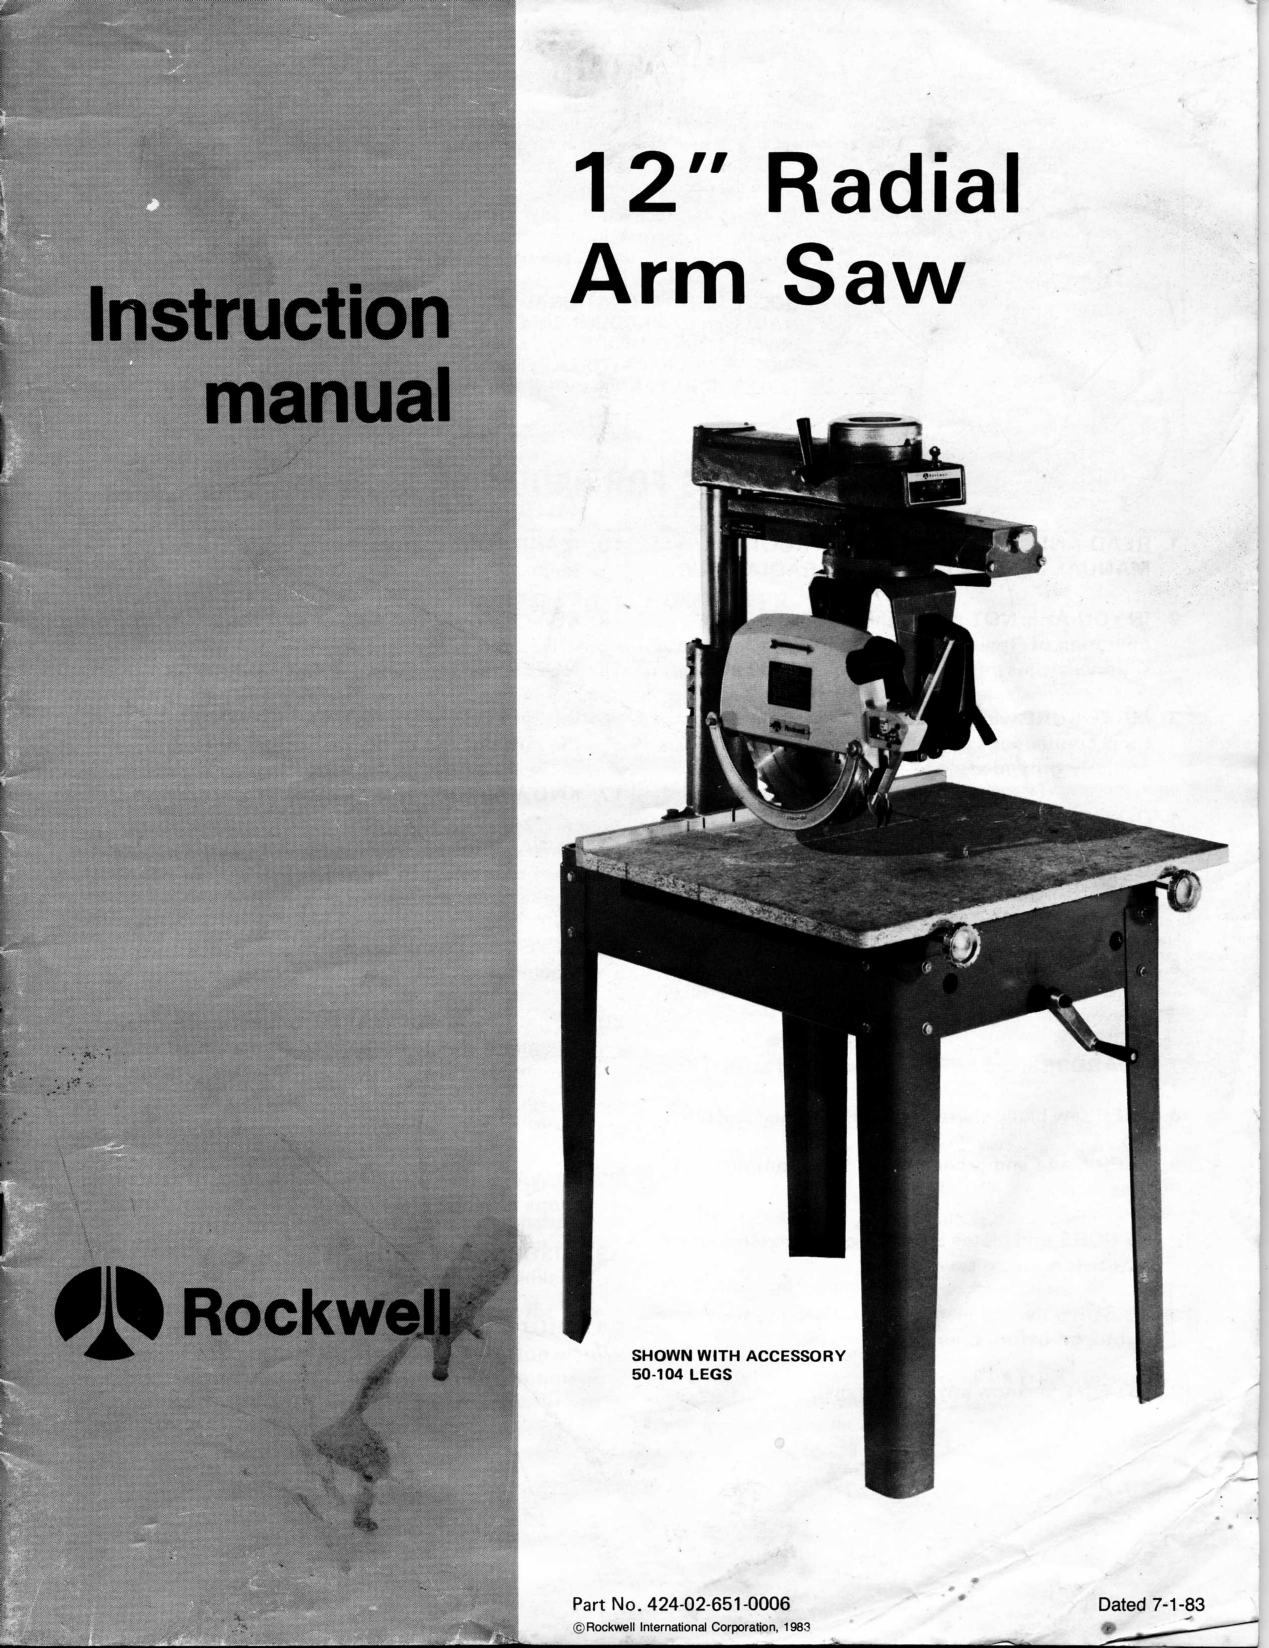 16 DELTA 14 18 Radial Arm Saws Operator Instructions & Parts Manual 